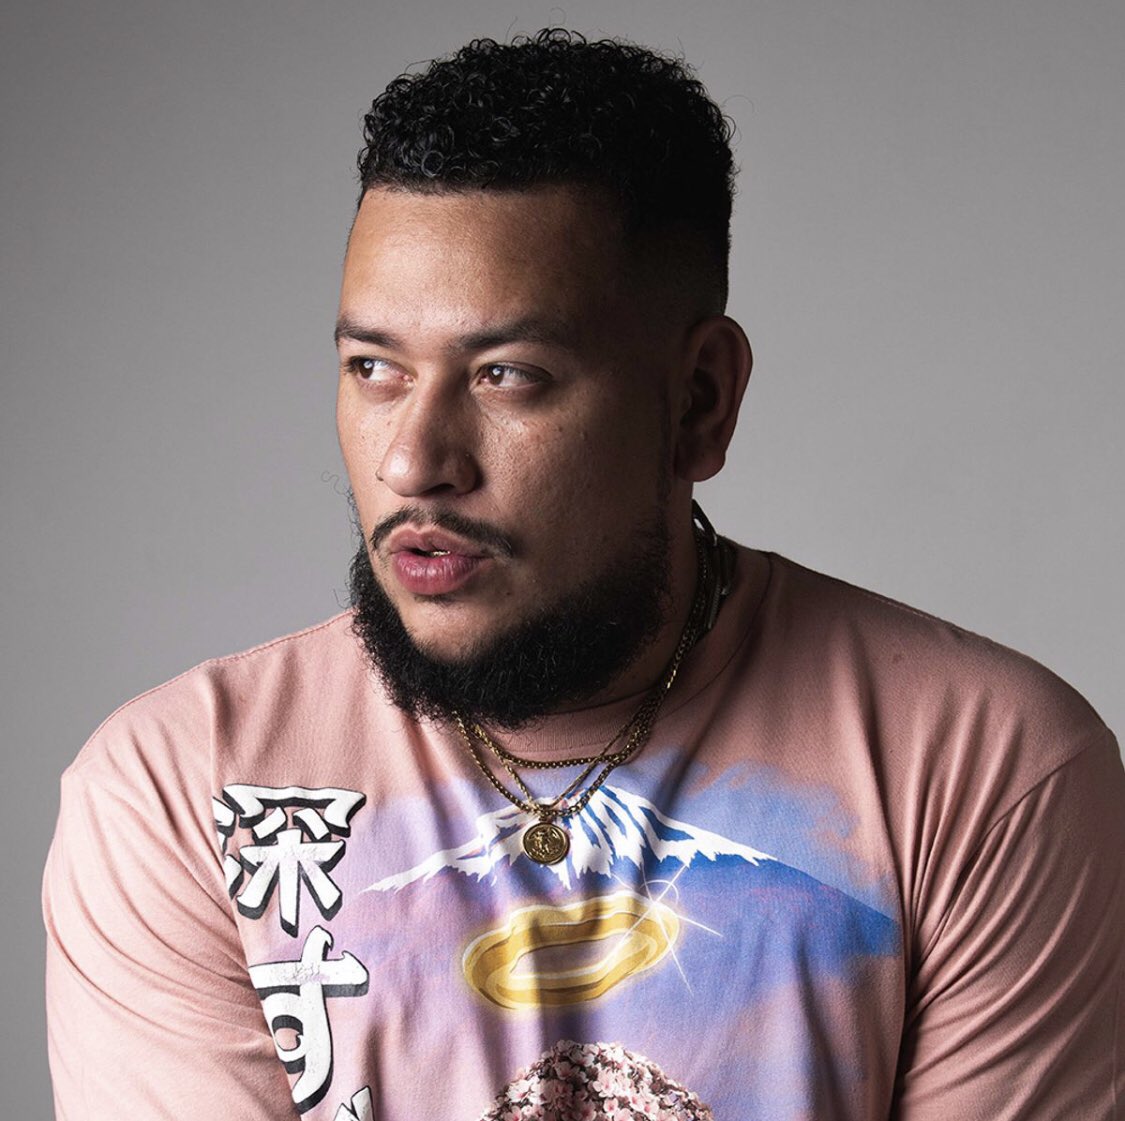 they took him away, now I'm alone in this cold and wicked world. 💔 I miss him everyday @akaworldwide. #AKAFridays